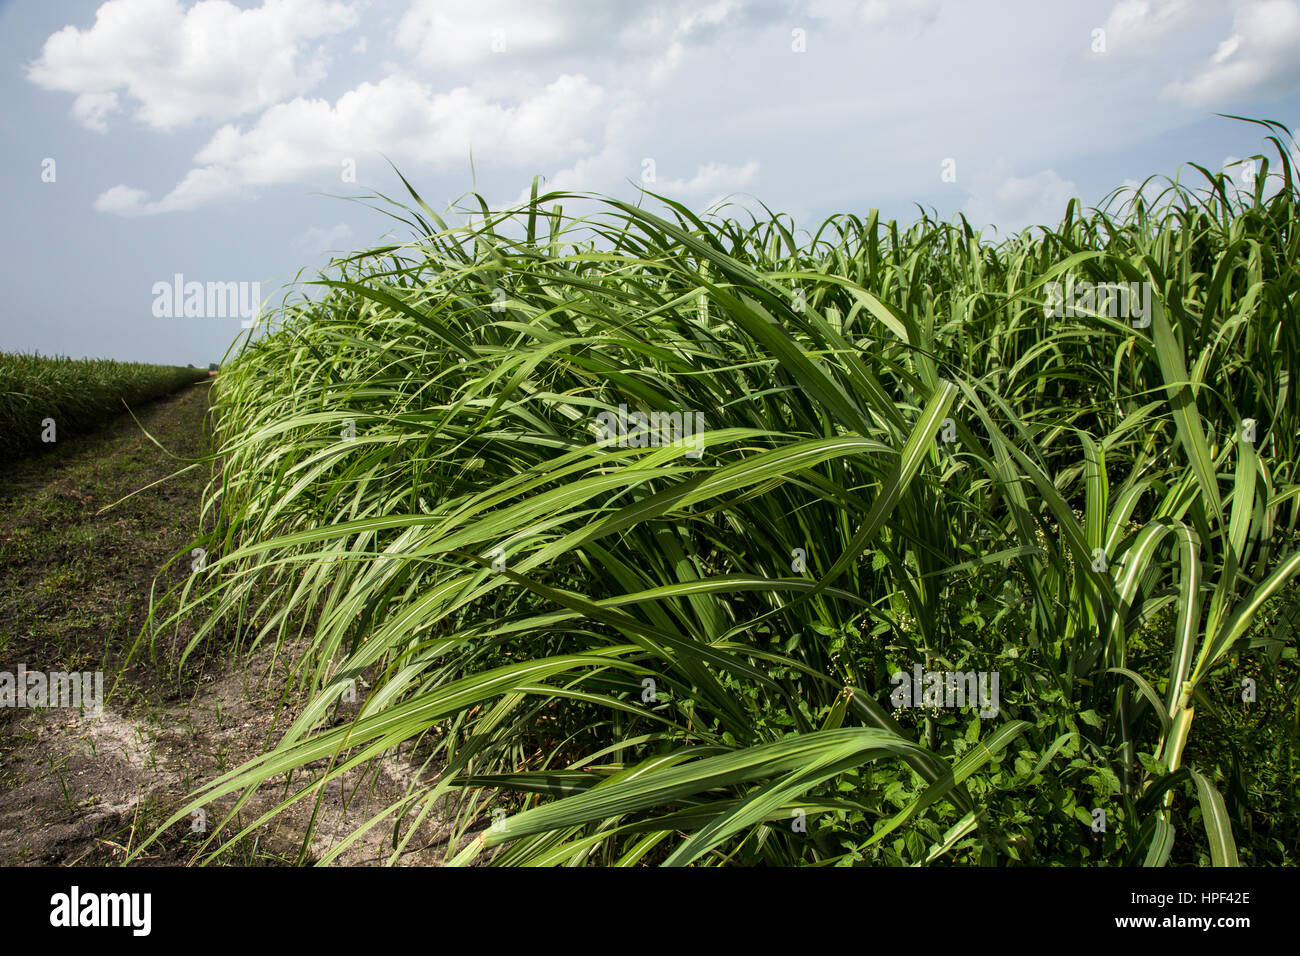 Sugar cane near Lake Okeechobee in Florida where hundreds of acres of wild Florida forest used to be. Stock Photo